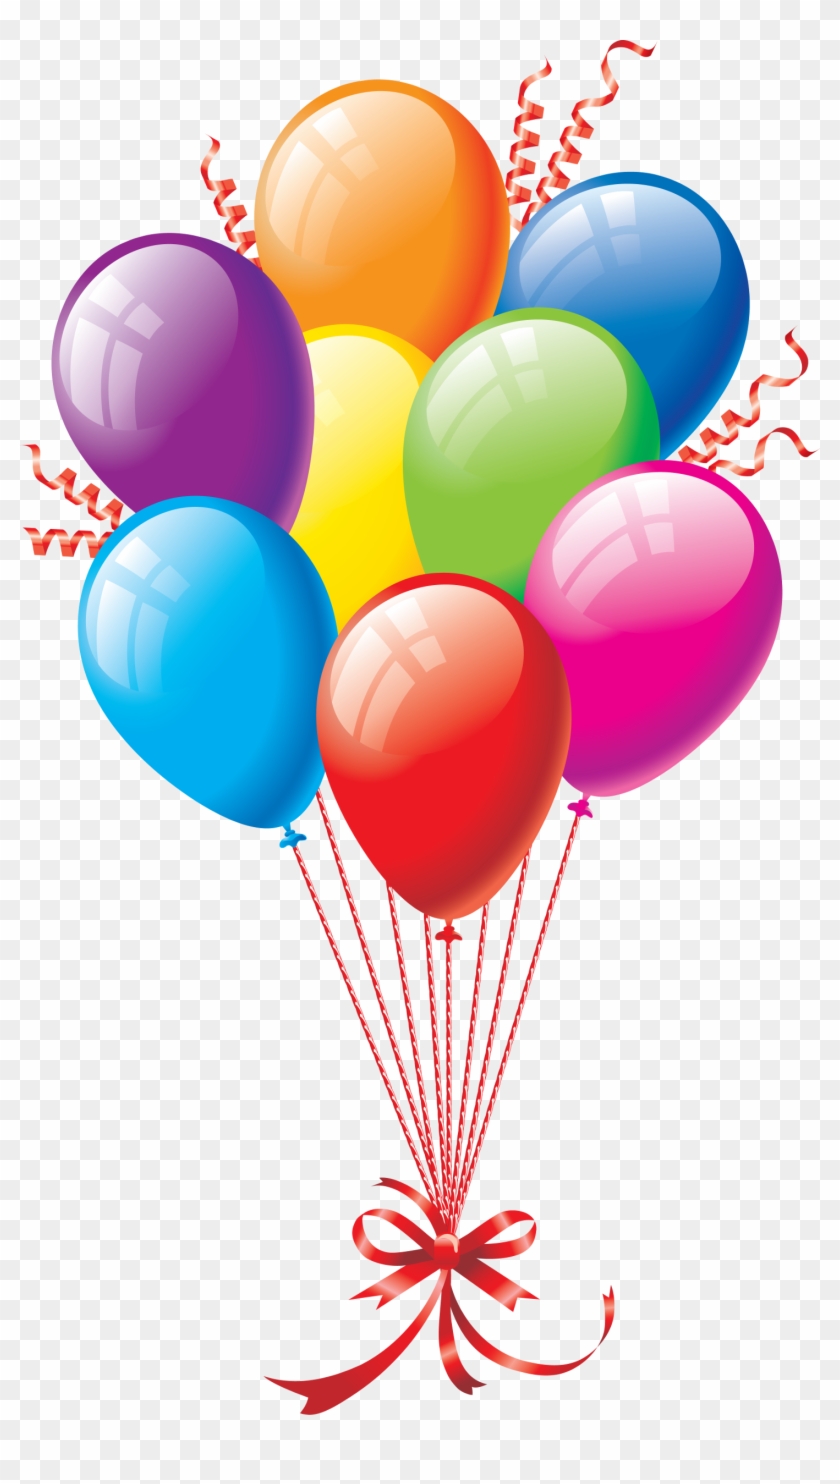 Birthday Balloons Png - Transparent Transparent Background Balloons Png Clipart